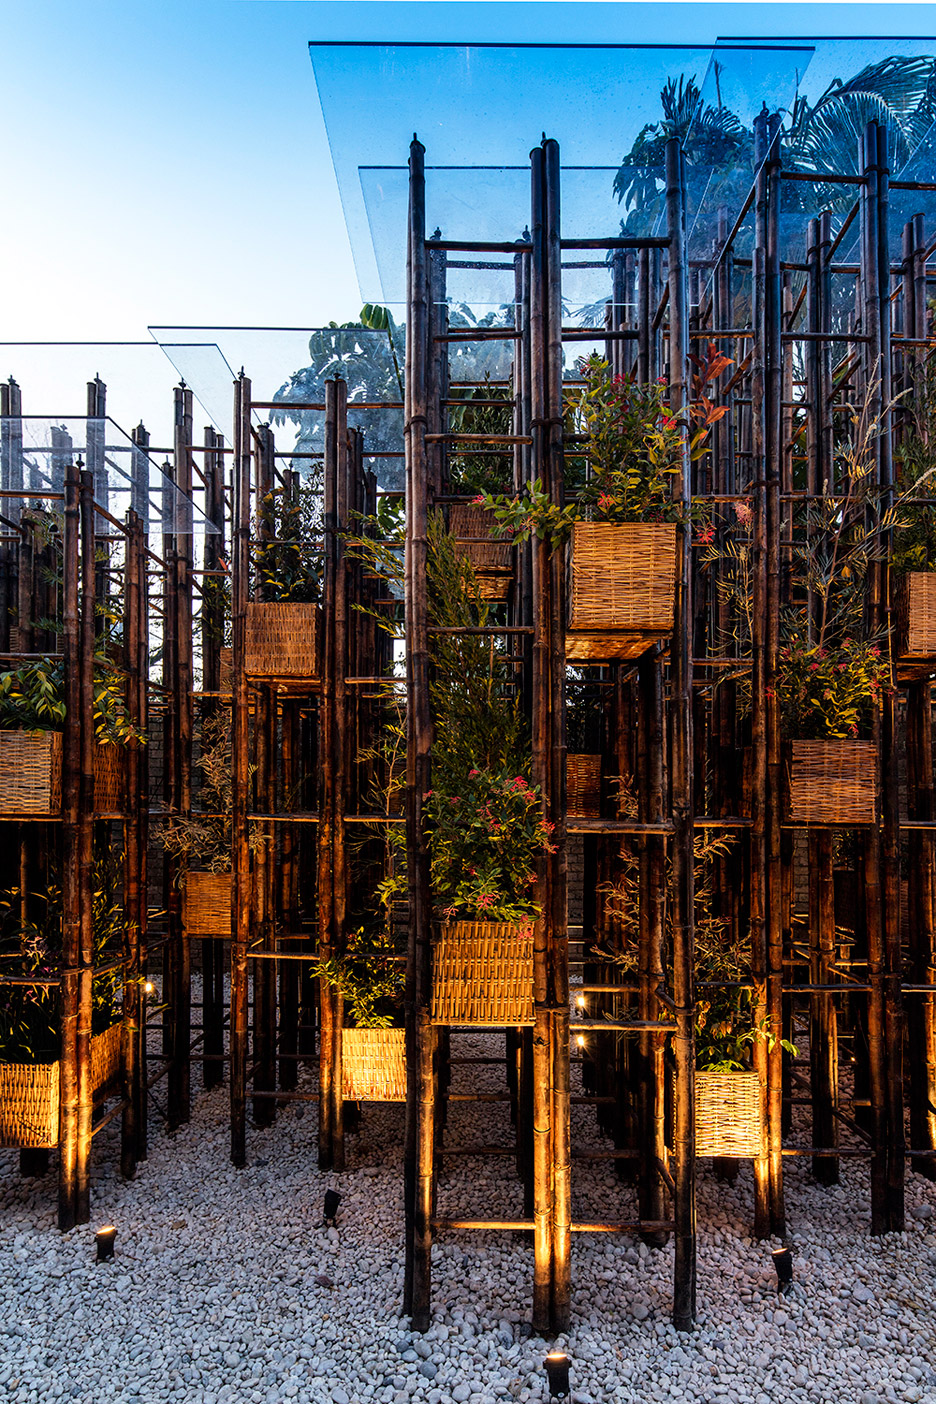 Vo Trong Nghia uses bamboo for this pavilion at Sydney's SCAF gallery